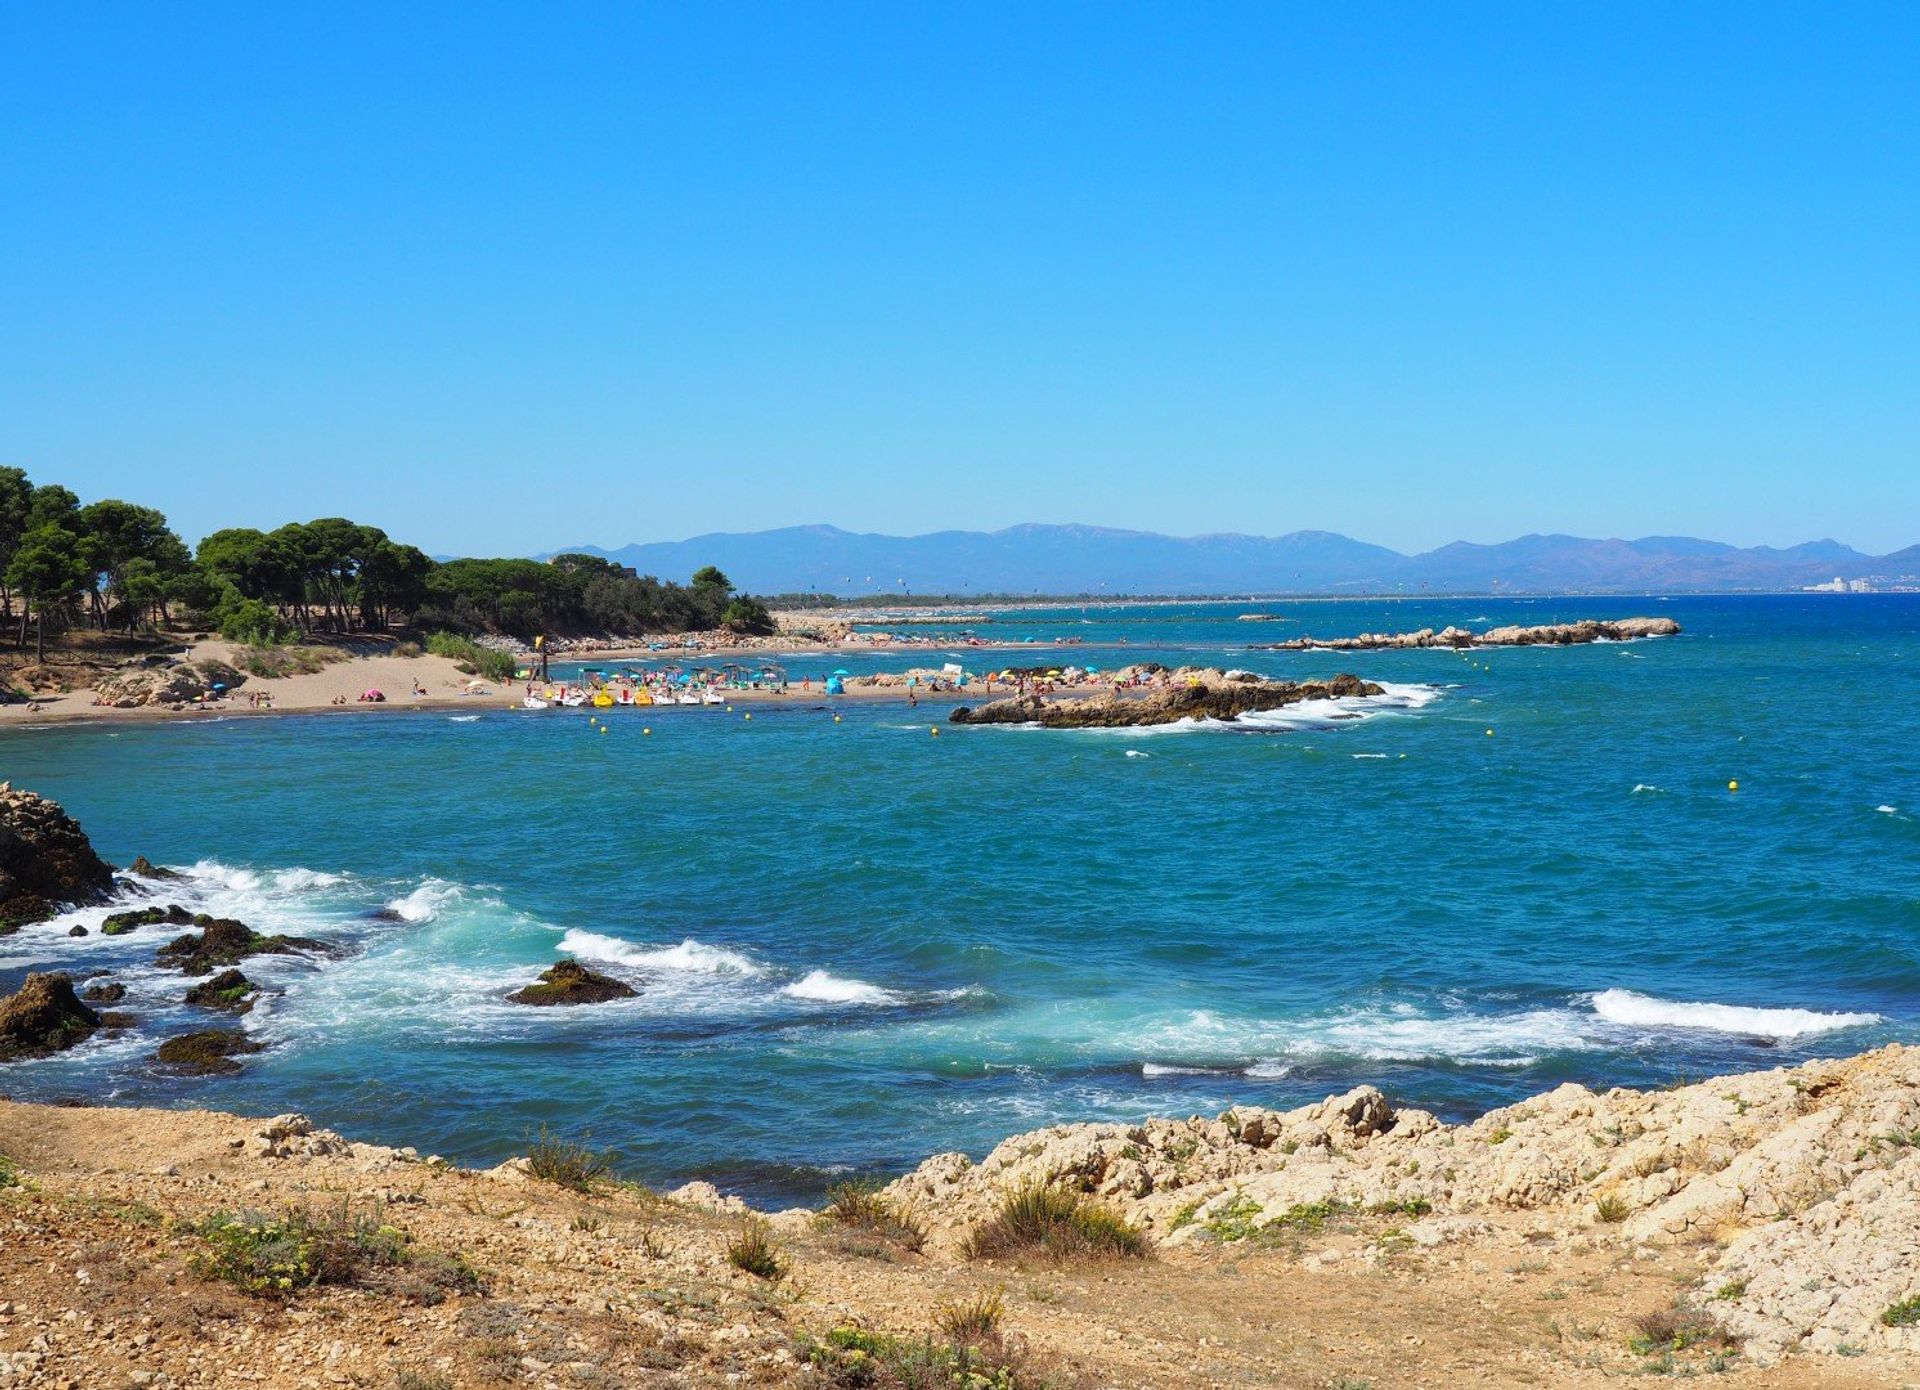 People watch, sit and relax or simply bask in the Mediterranean sun on the family-friendly Portitxol beach